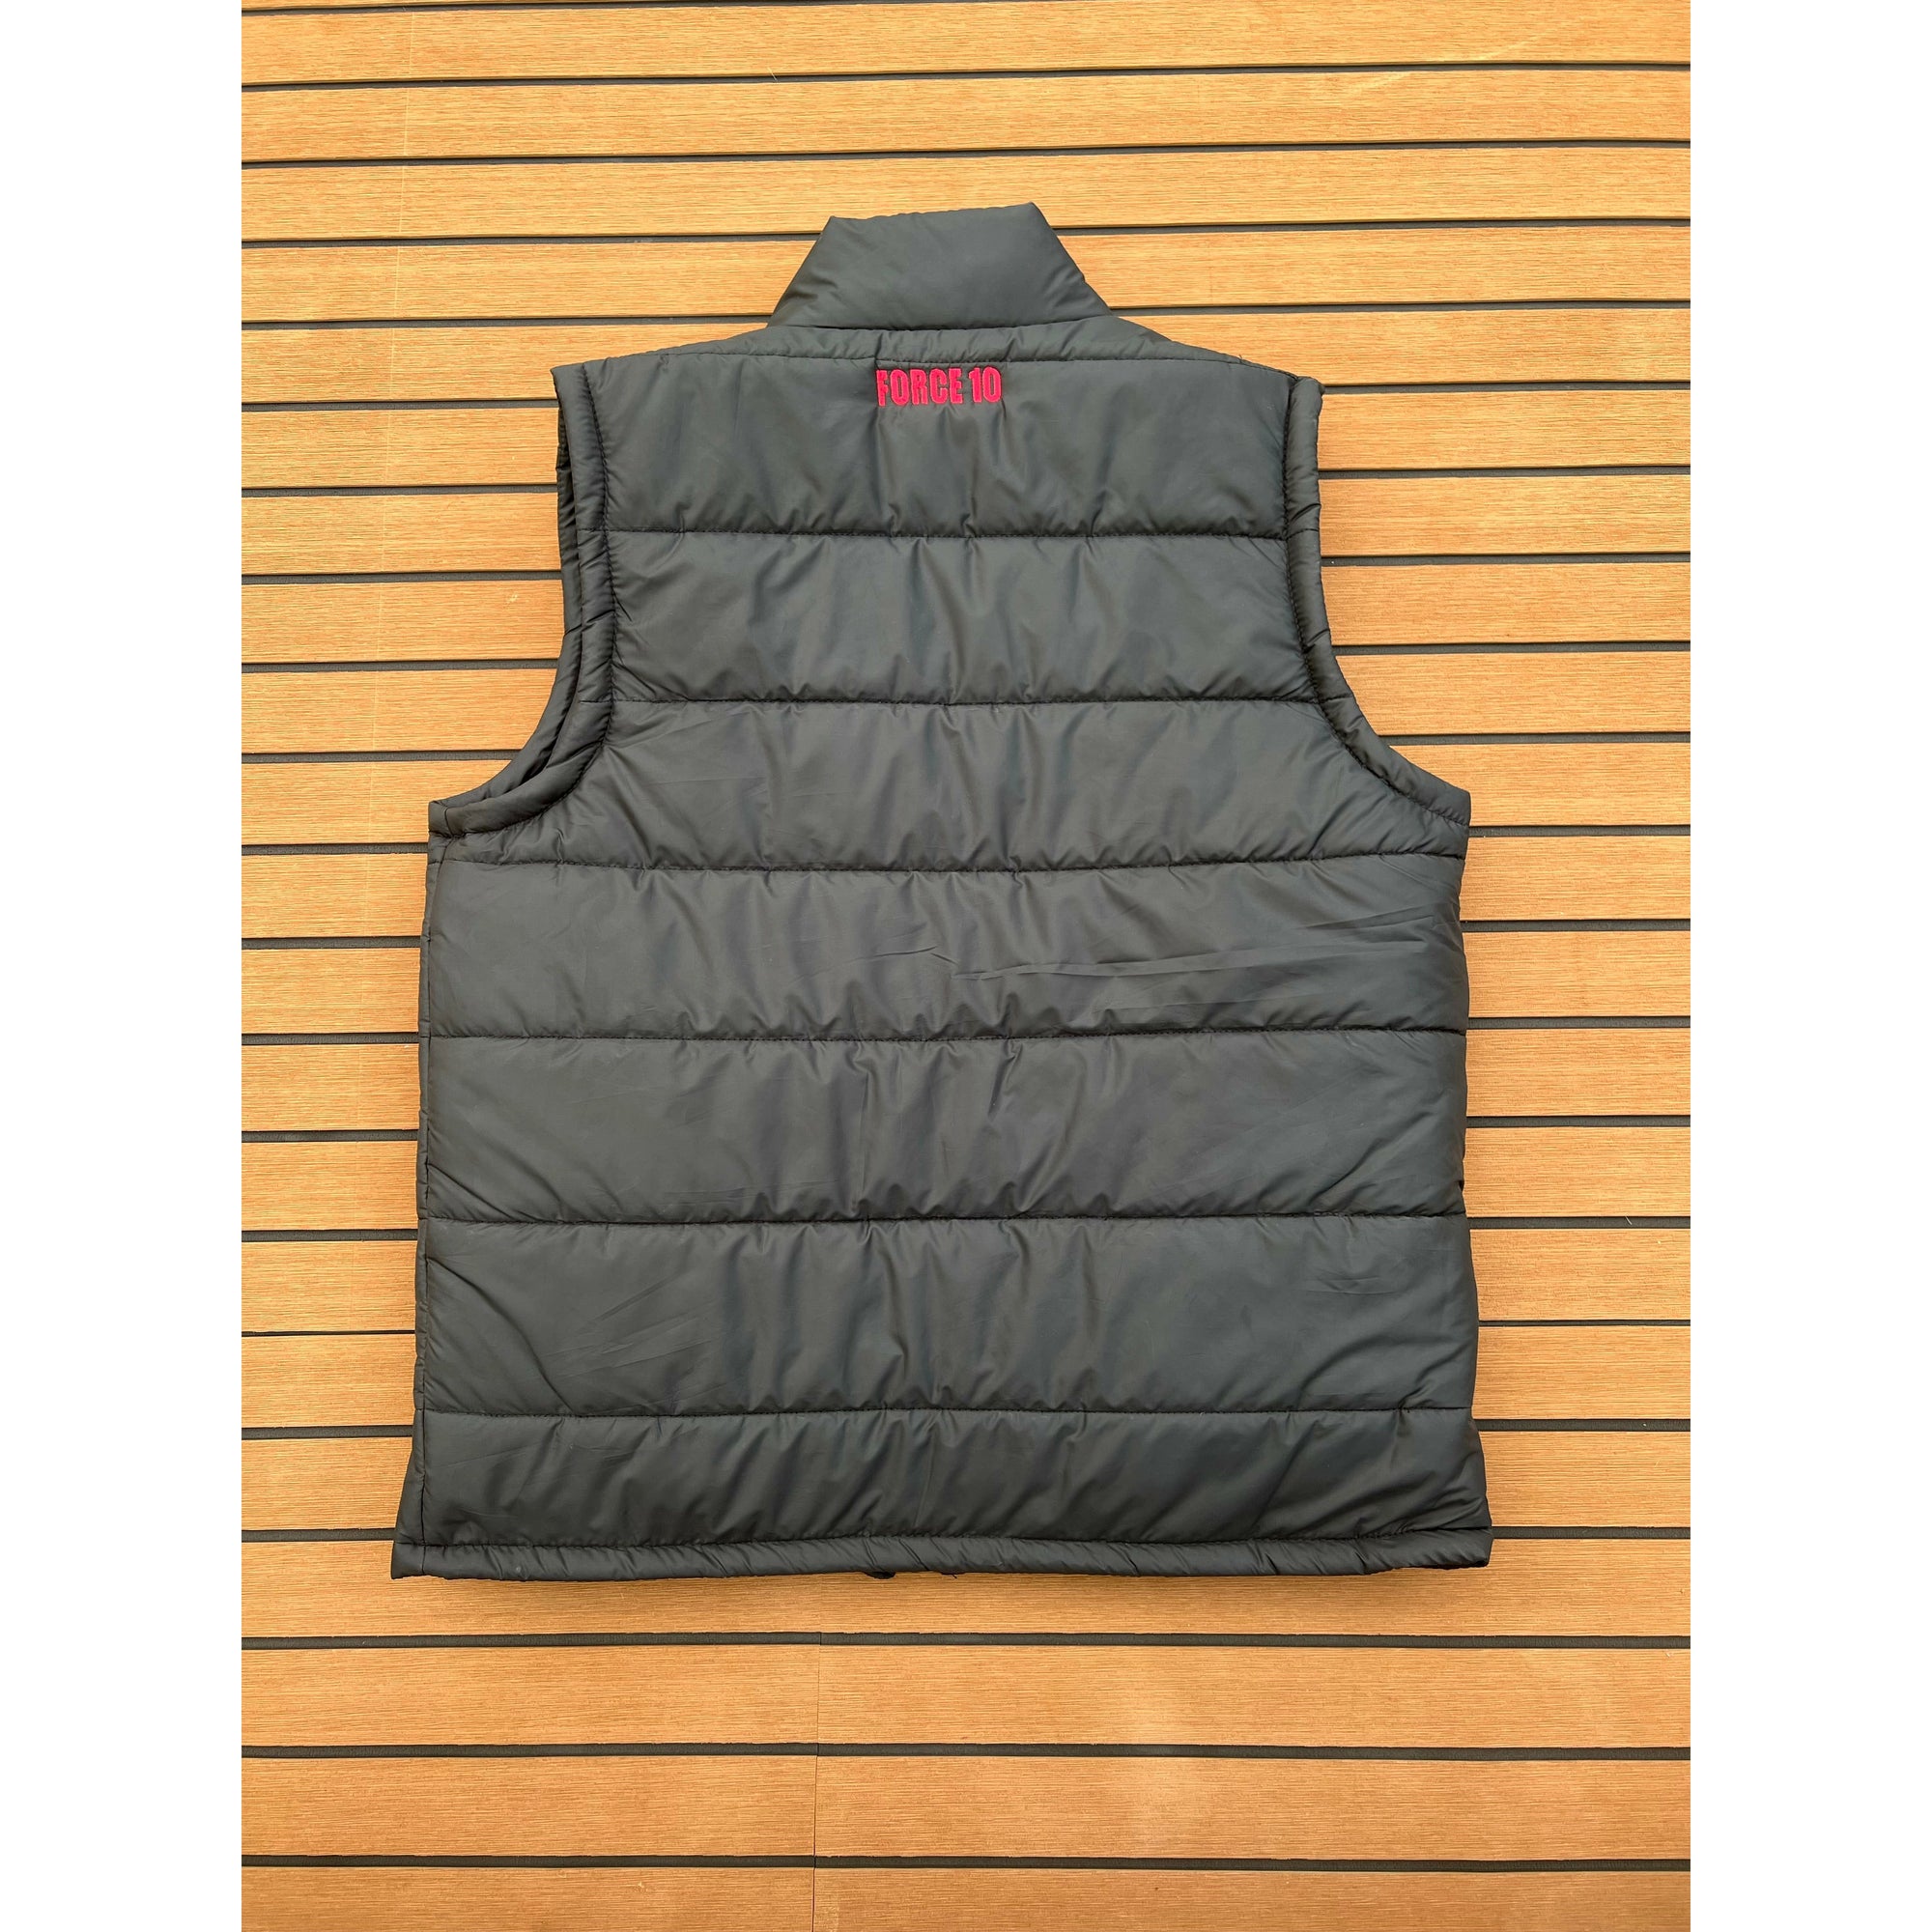 FORCE 10 OFFICIAL ⚓️ PORTSIDE BODY WARMER